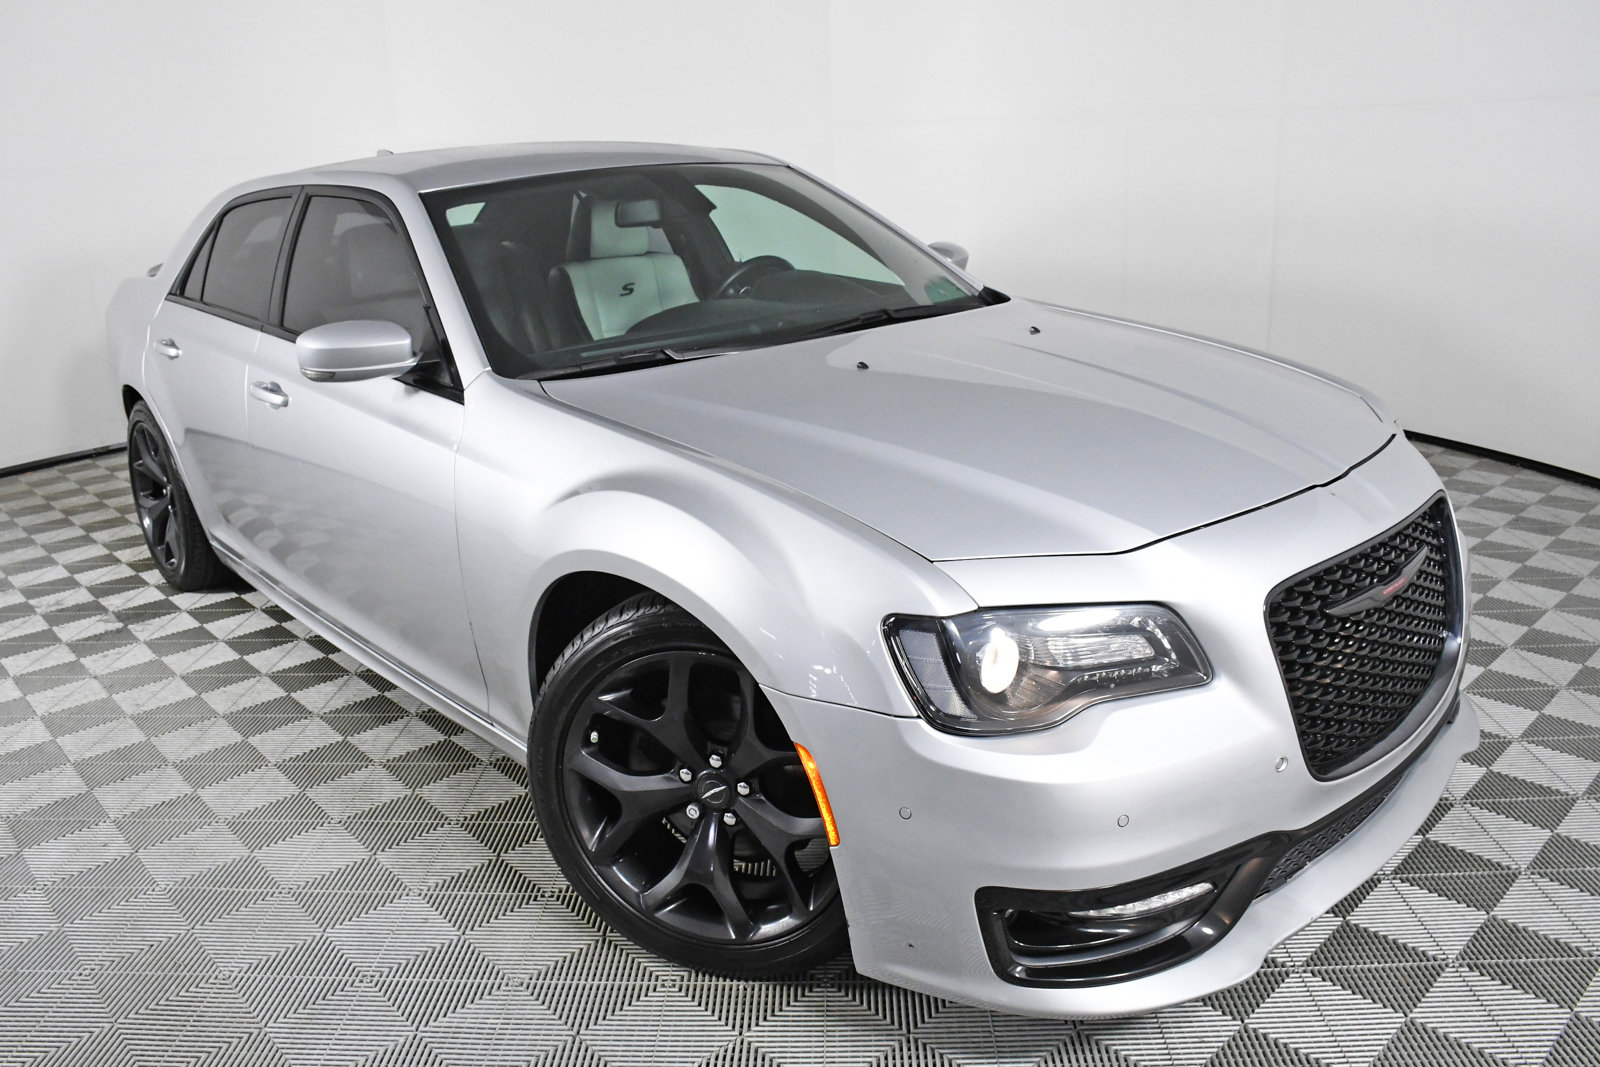 Pre-Owned 2021 Chrysler 300 300S 4dr Car in Palmetto Bay #MH512170 | HGreg  Nissan Kendall